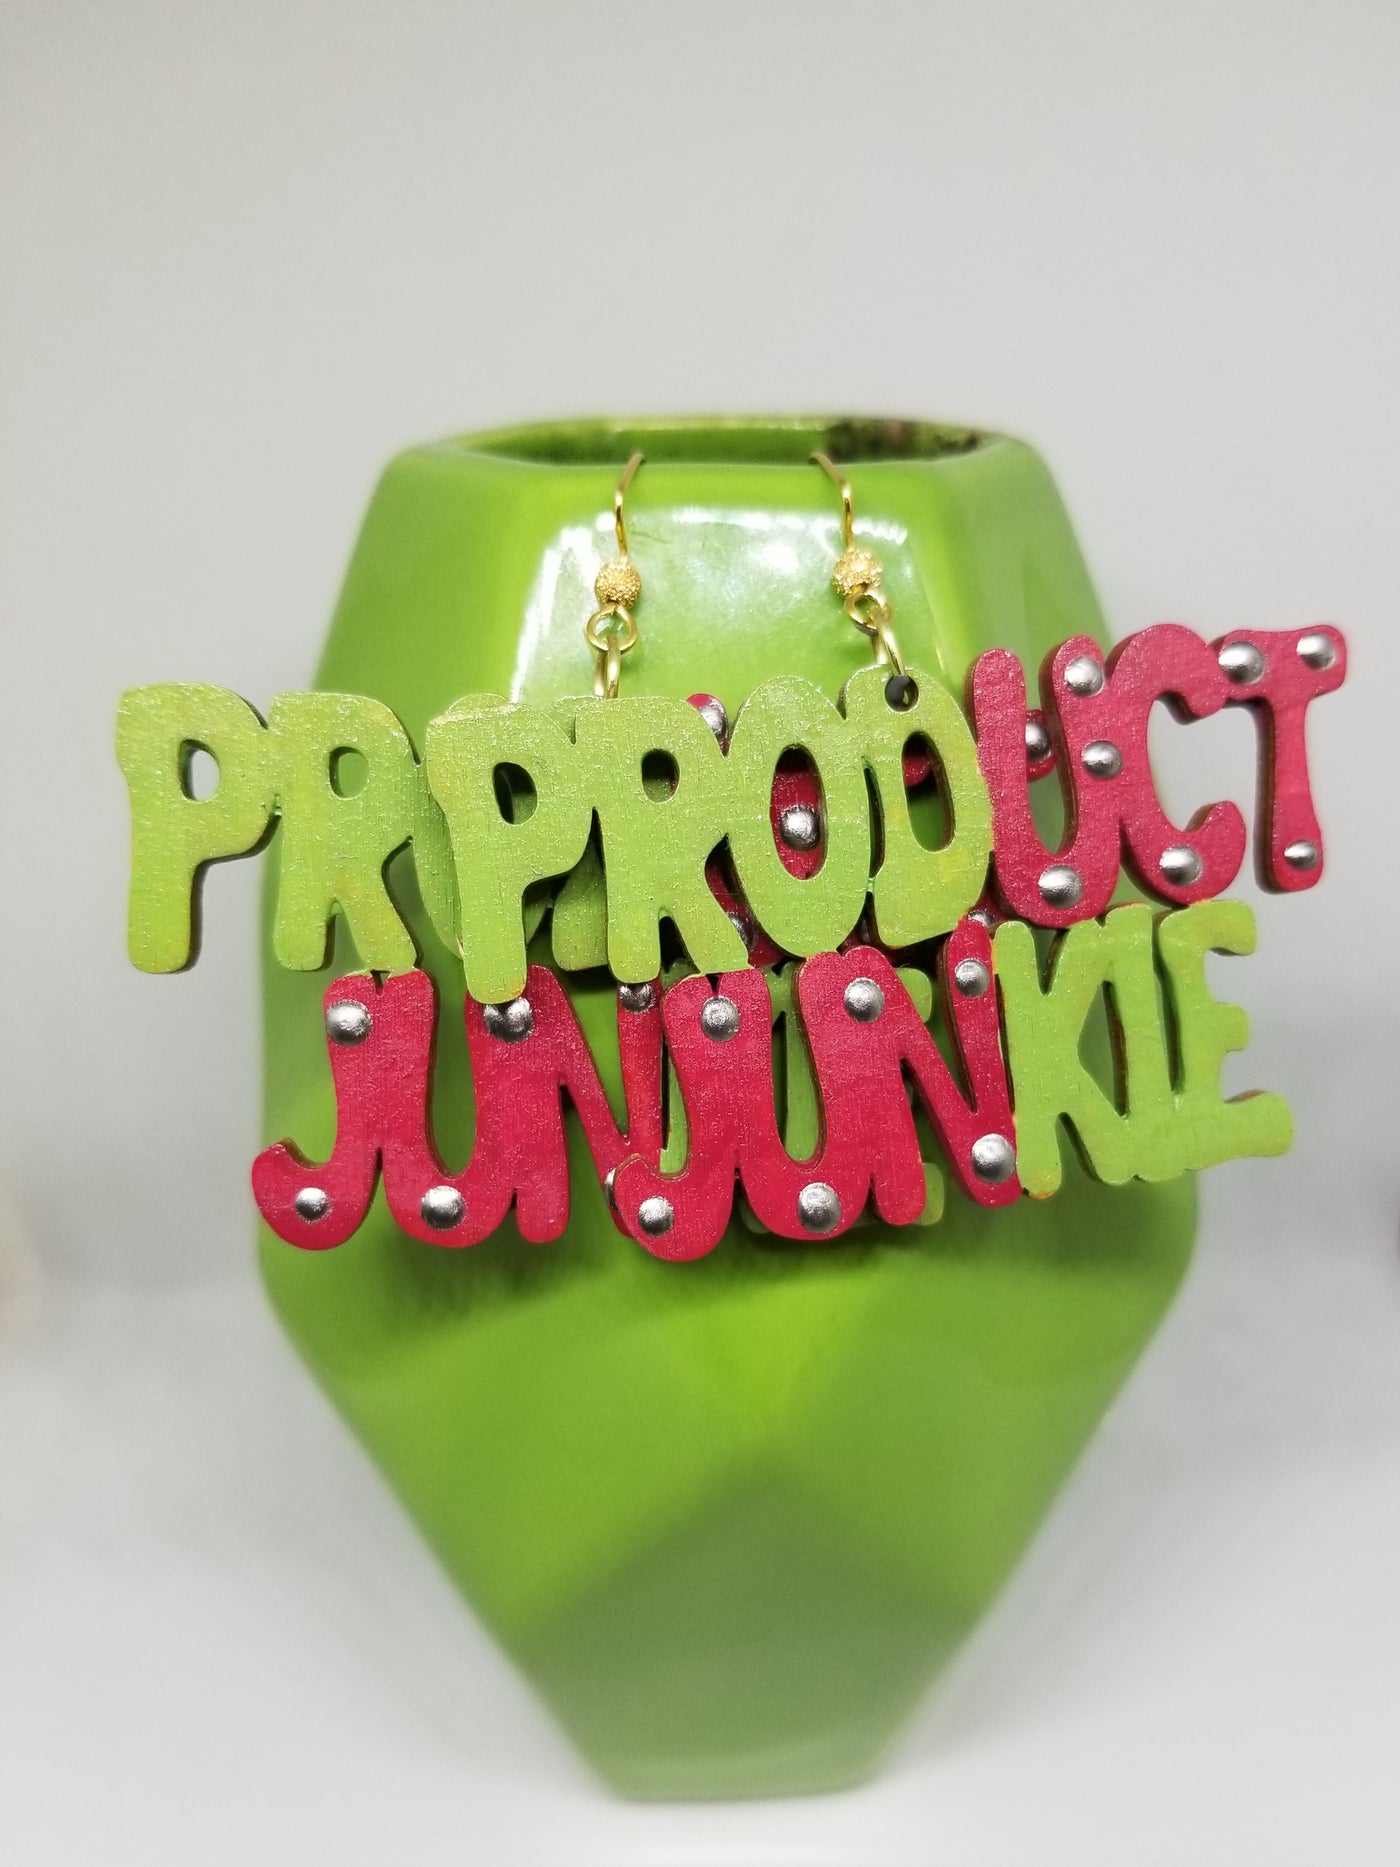 Product Junkie